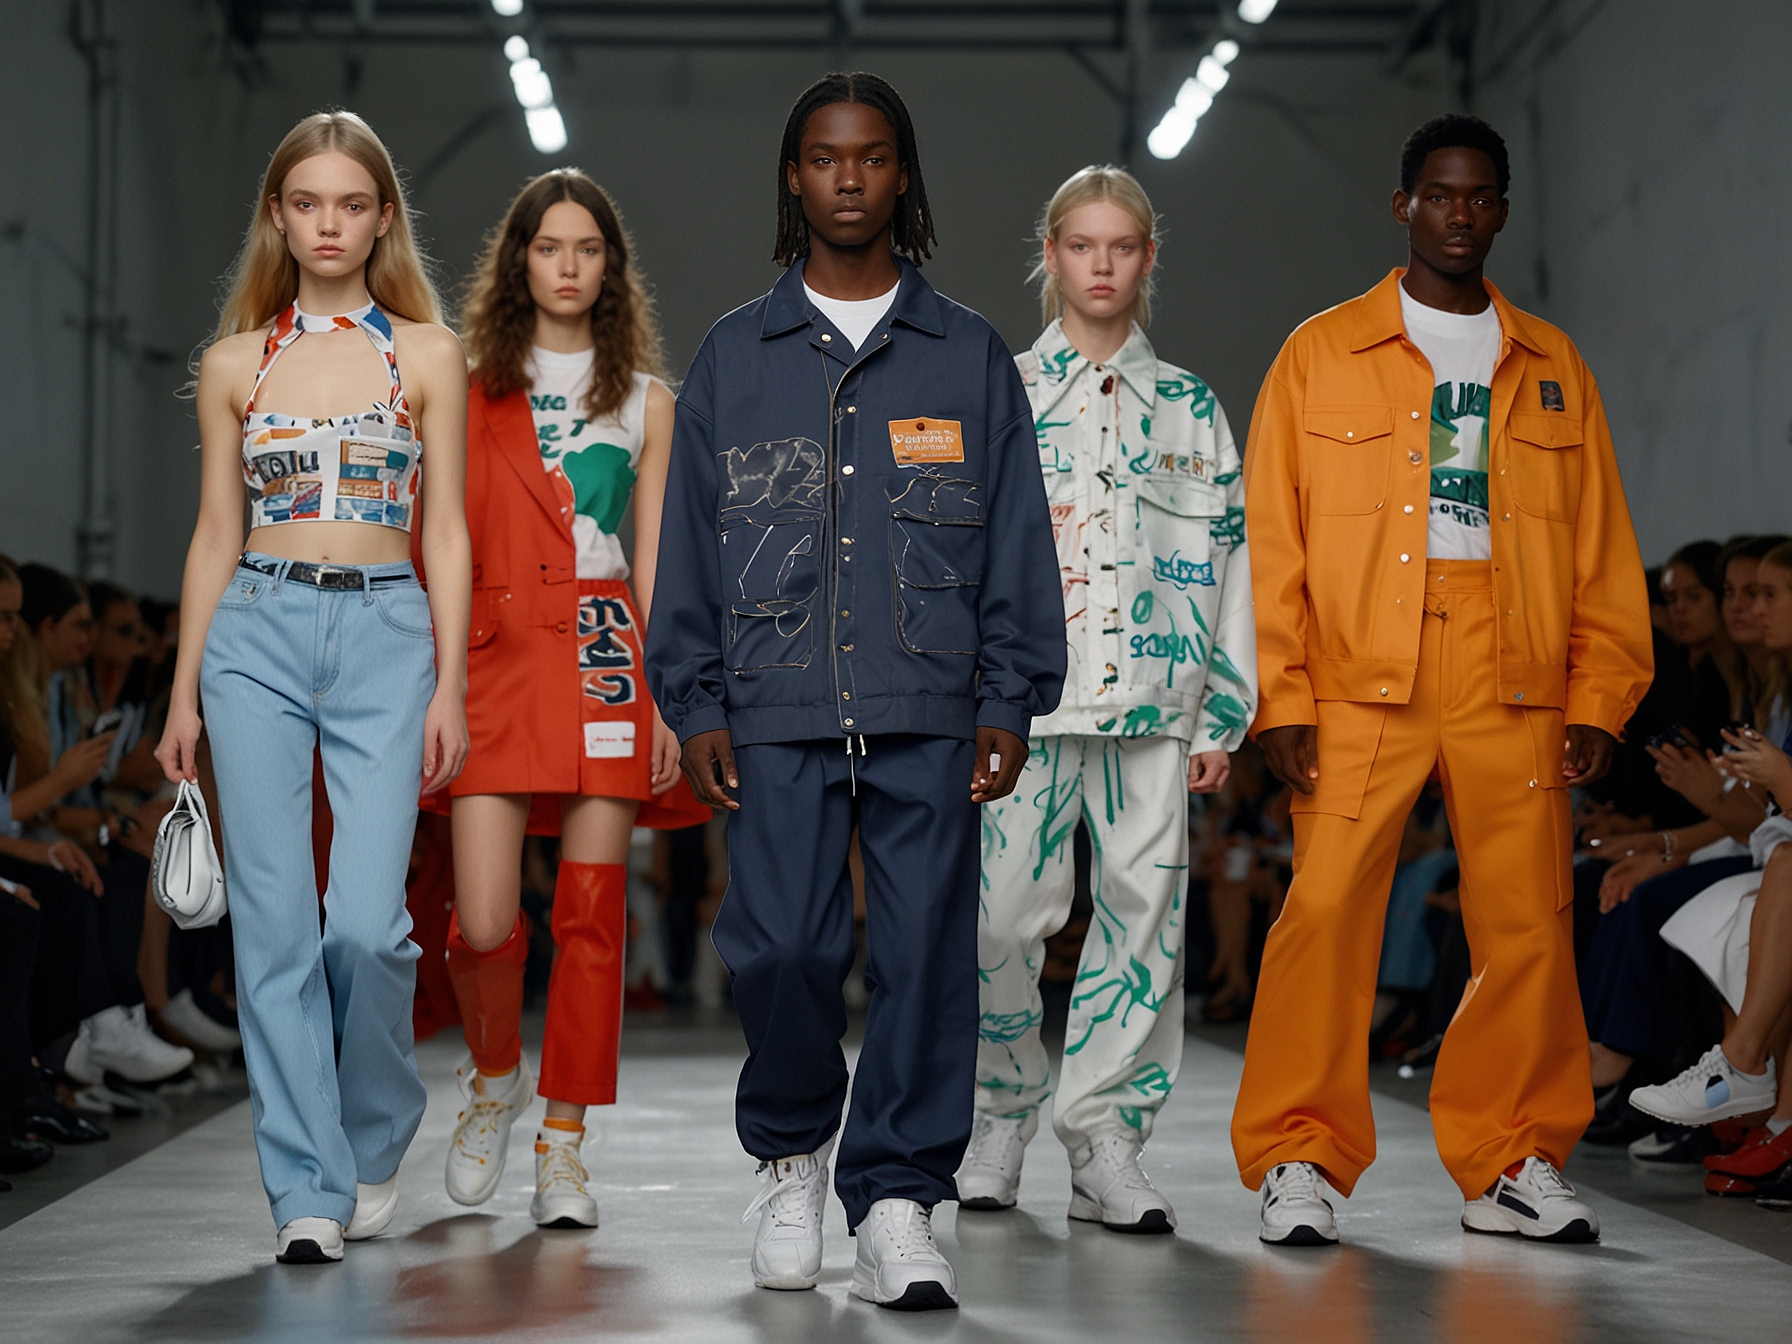 Models showcase Martine Rose's innovative SS25 designs with oversized silhouettes, splotched patterns, and signature sportswear elements on the dynamic runway against a backdrop of branded posters and discarded fabrics.